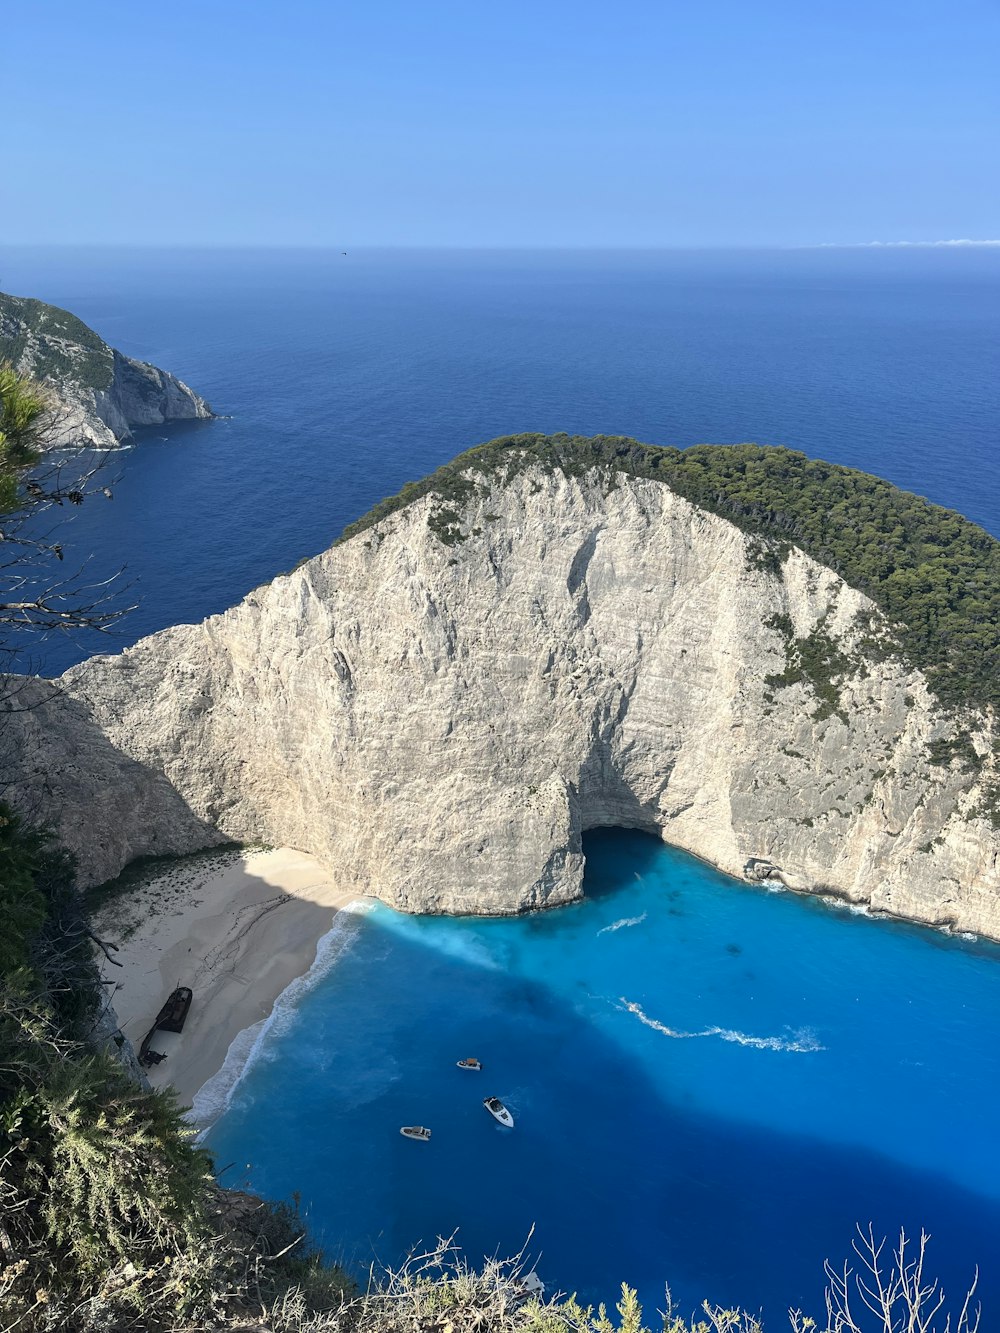 a large blue body of water next to a cliff